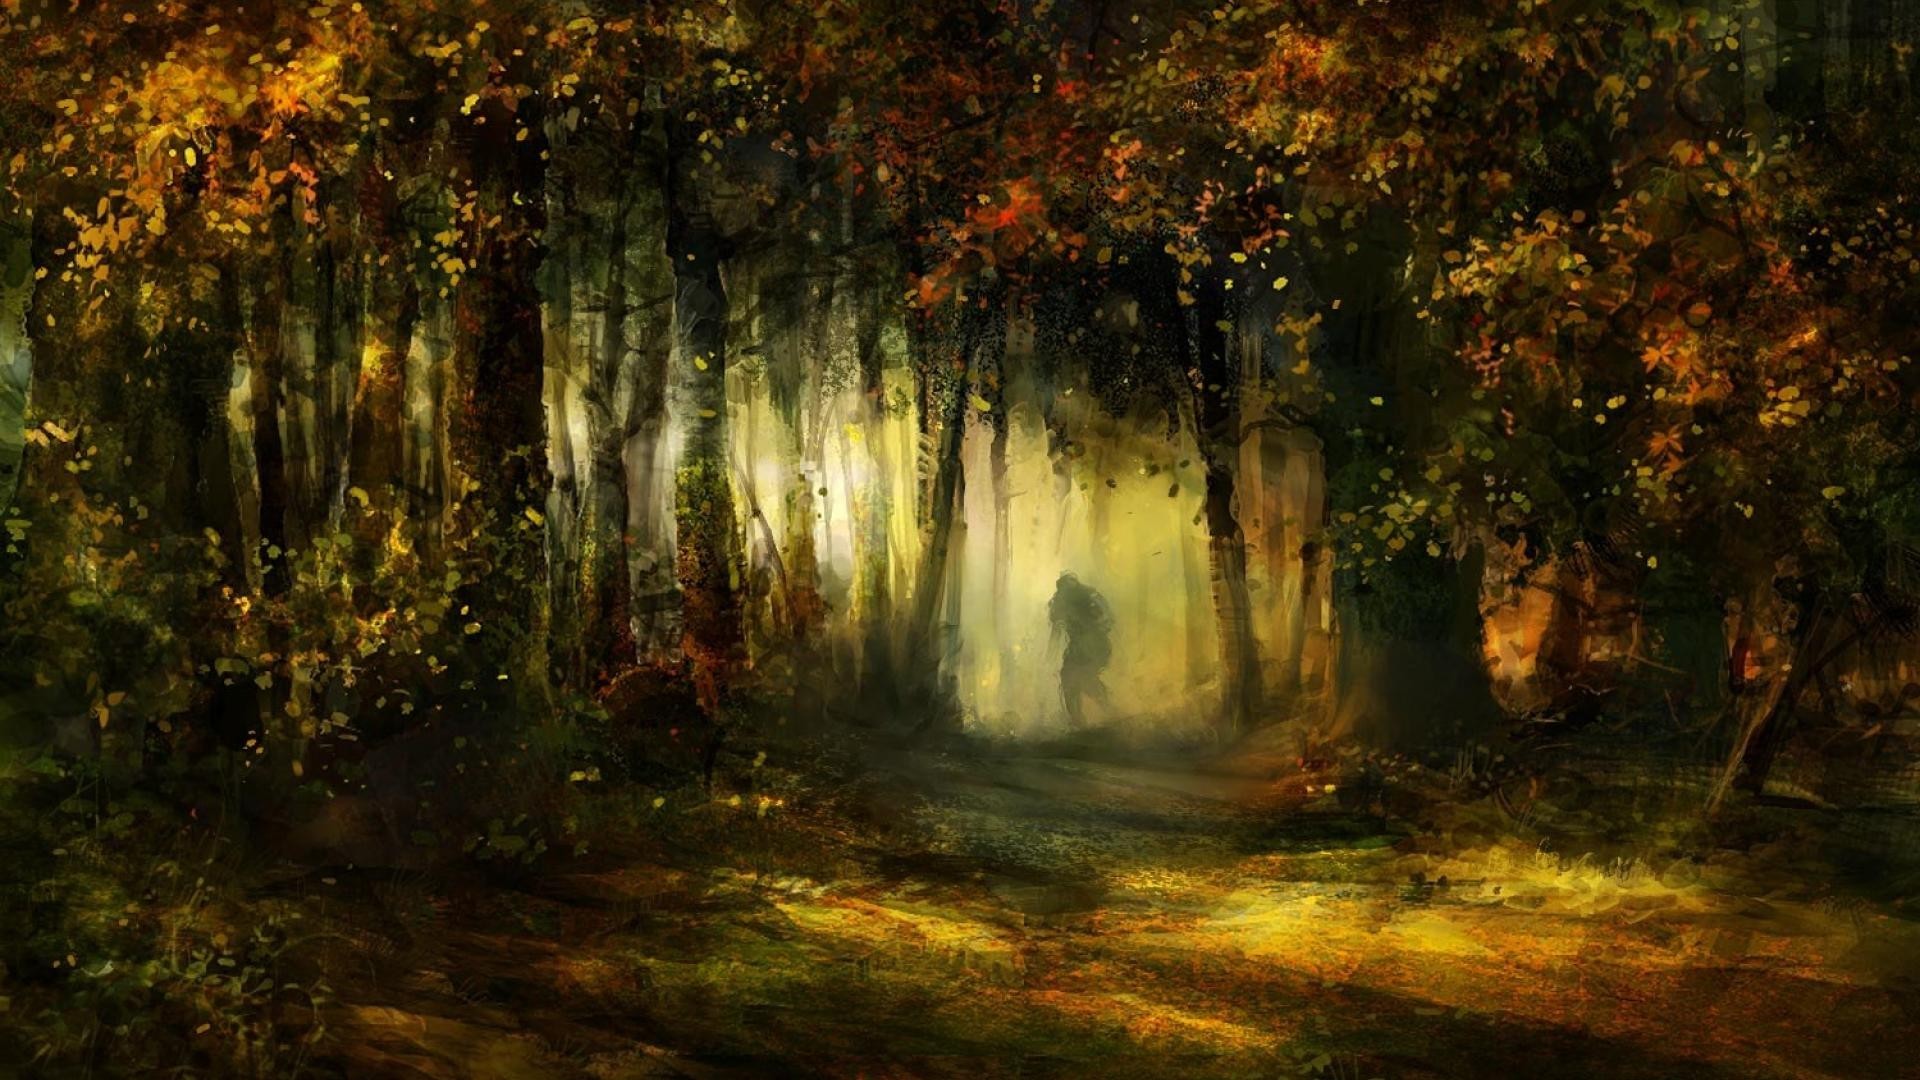 1920x1080 . Human Tag - Human Deep Mystic Forest Art Tree Nature Mist Fantasy  Awesome Artwork HD Backgrounds